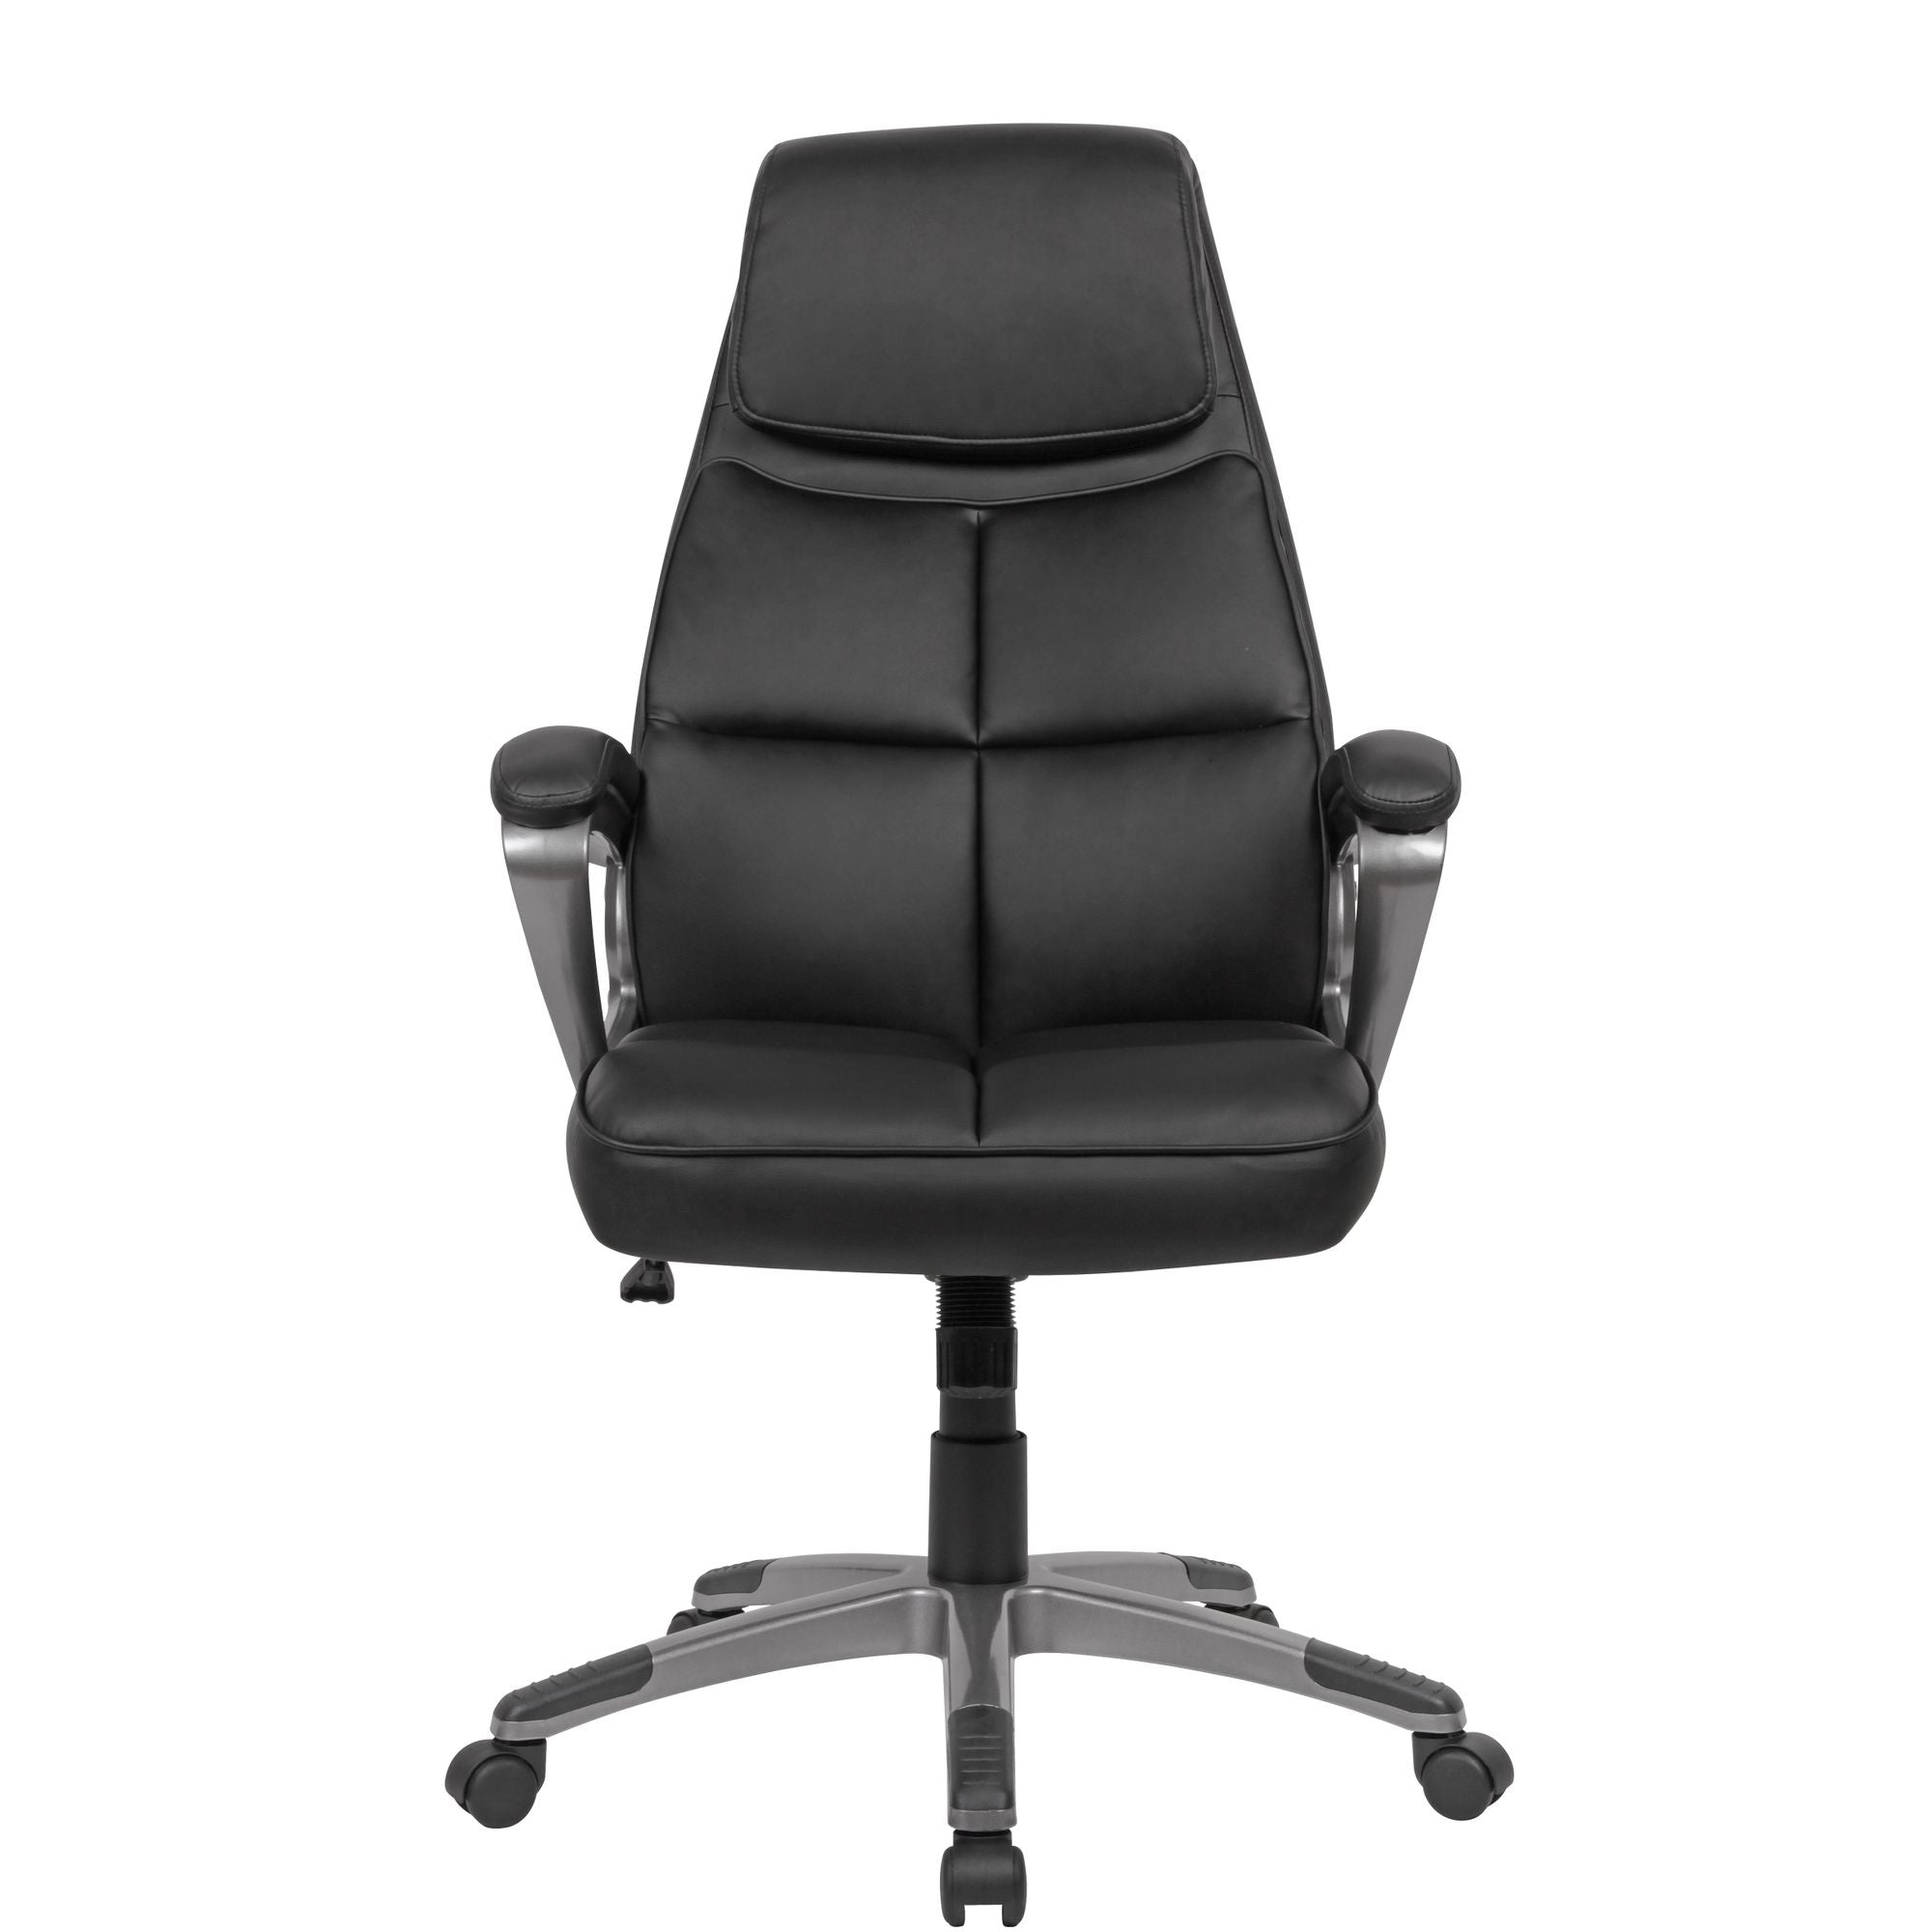 Nancy's Flint Office chair - Swivel chair - Office chair - Office chairs - Faux leather - Black